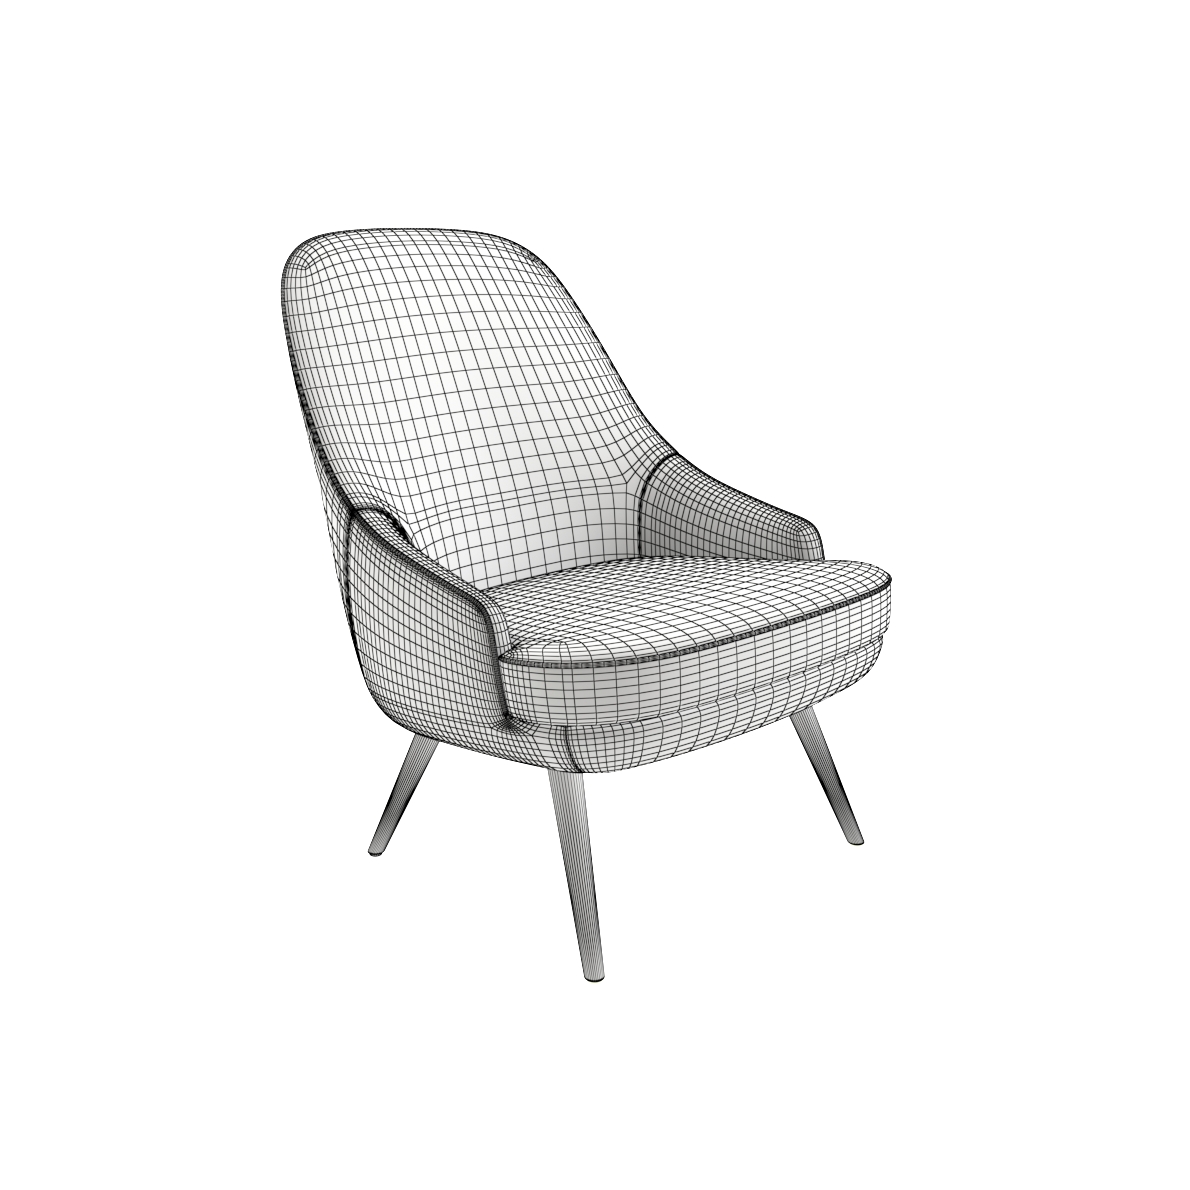 Chair and Bar chair from Walter Knoll - 3D Realistic Model - Artium3D